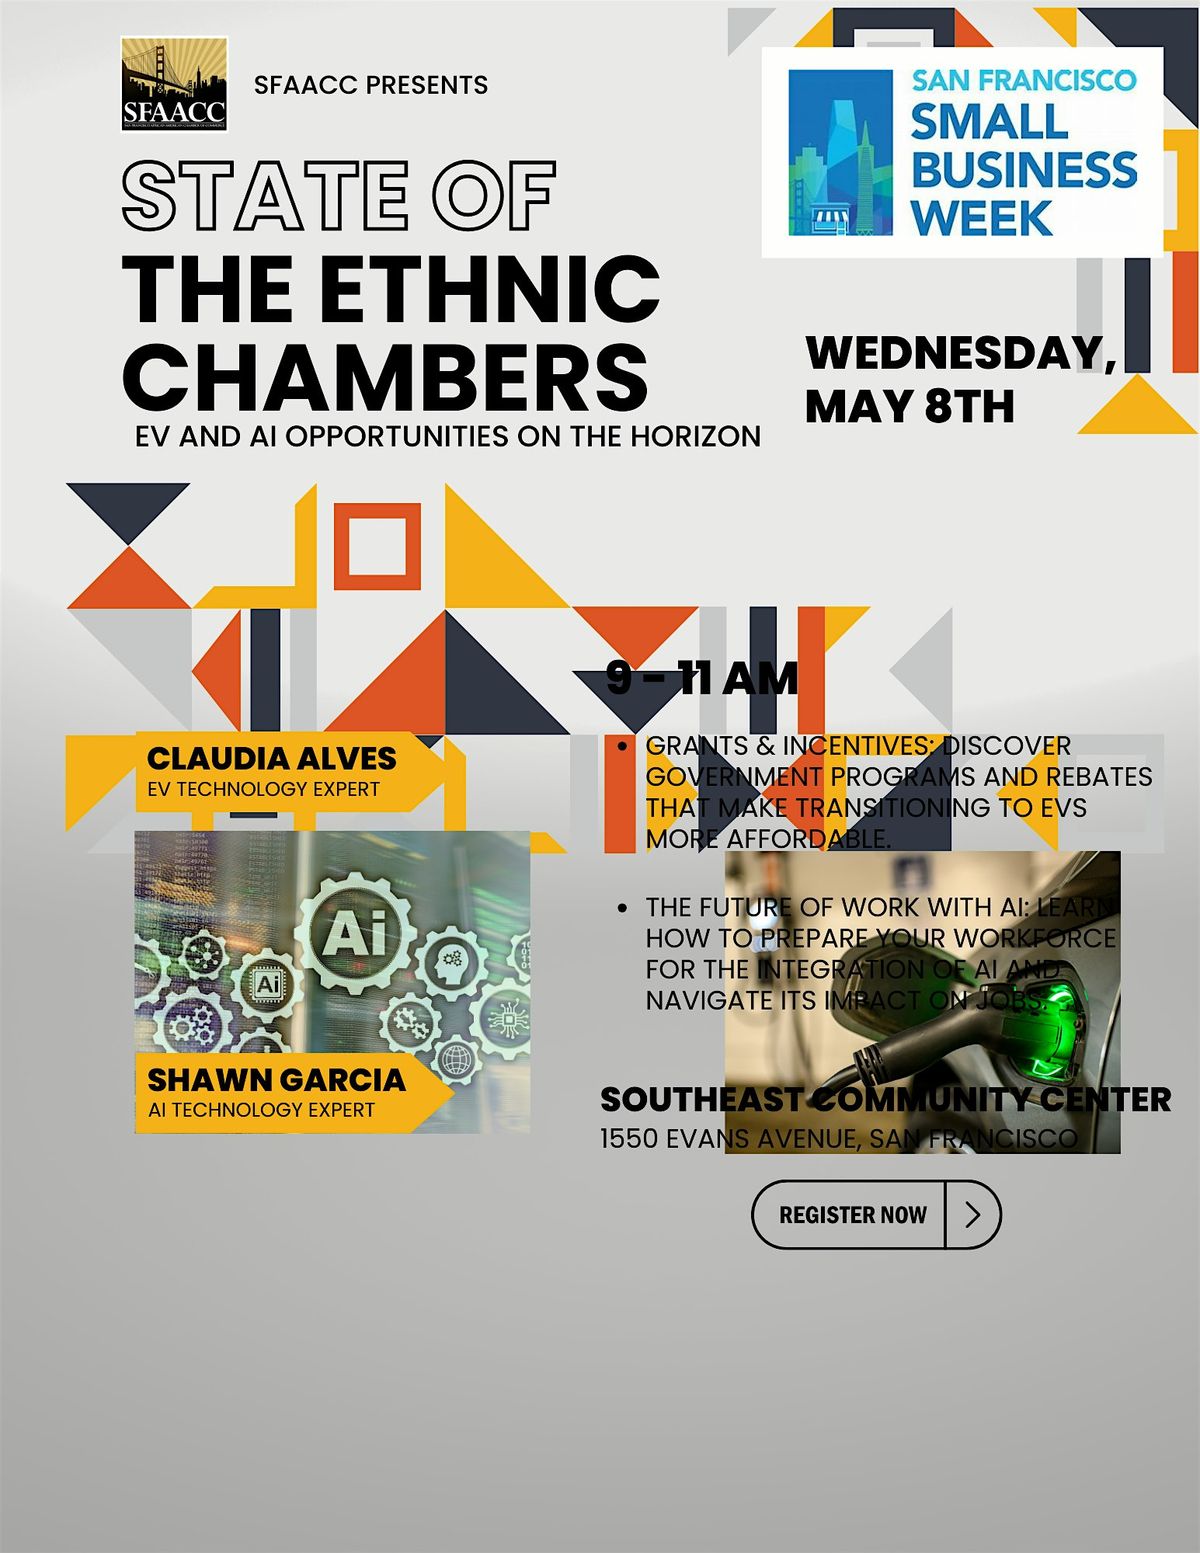 SF Small Business Week - State of the Ethnic Chambers